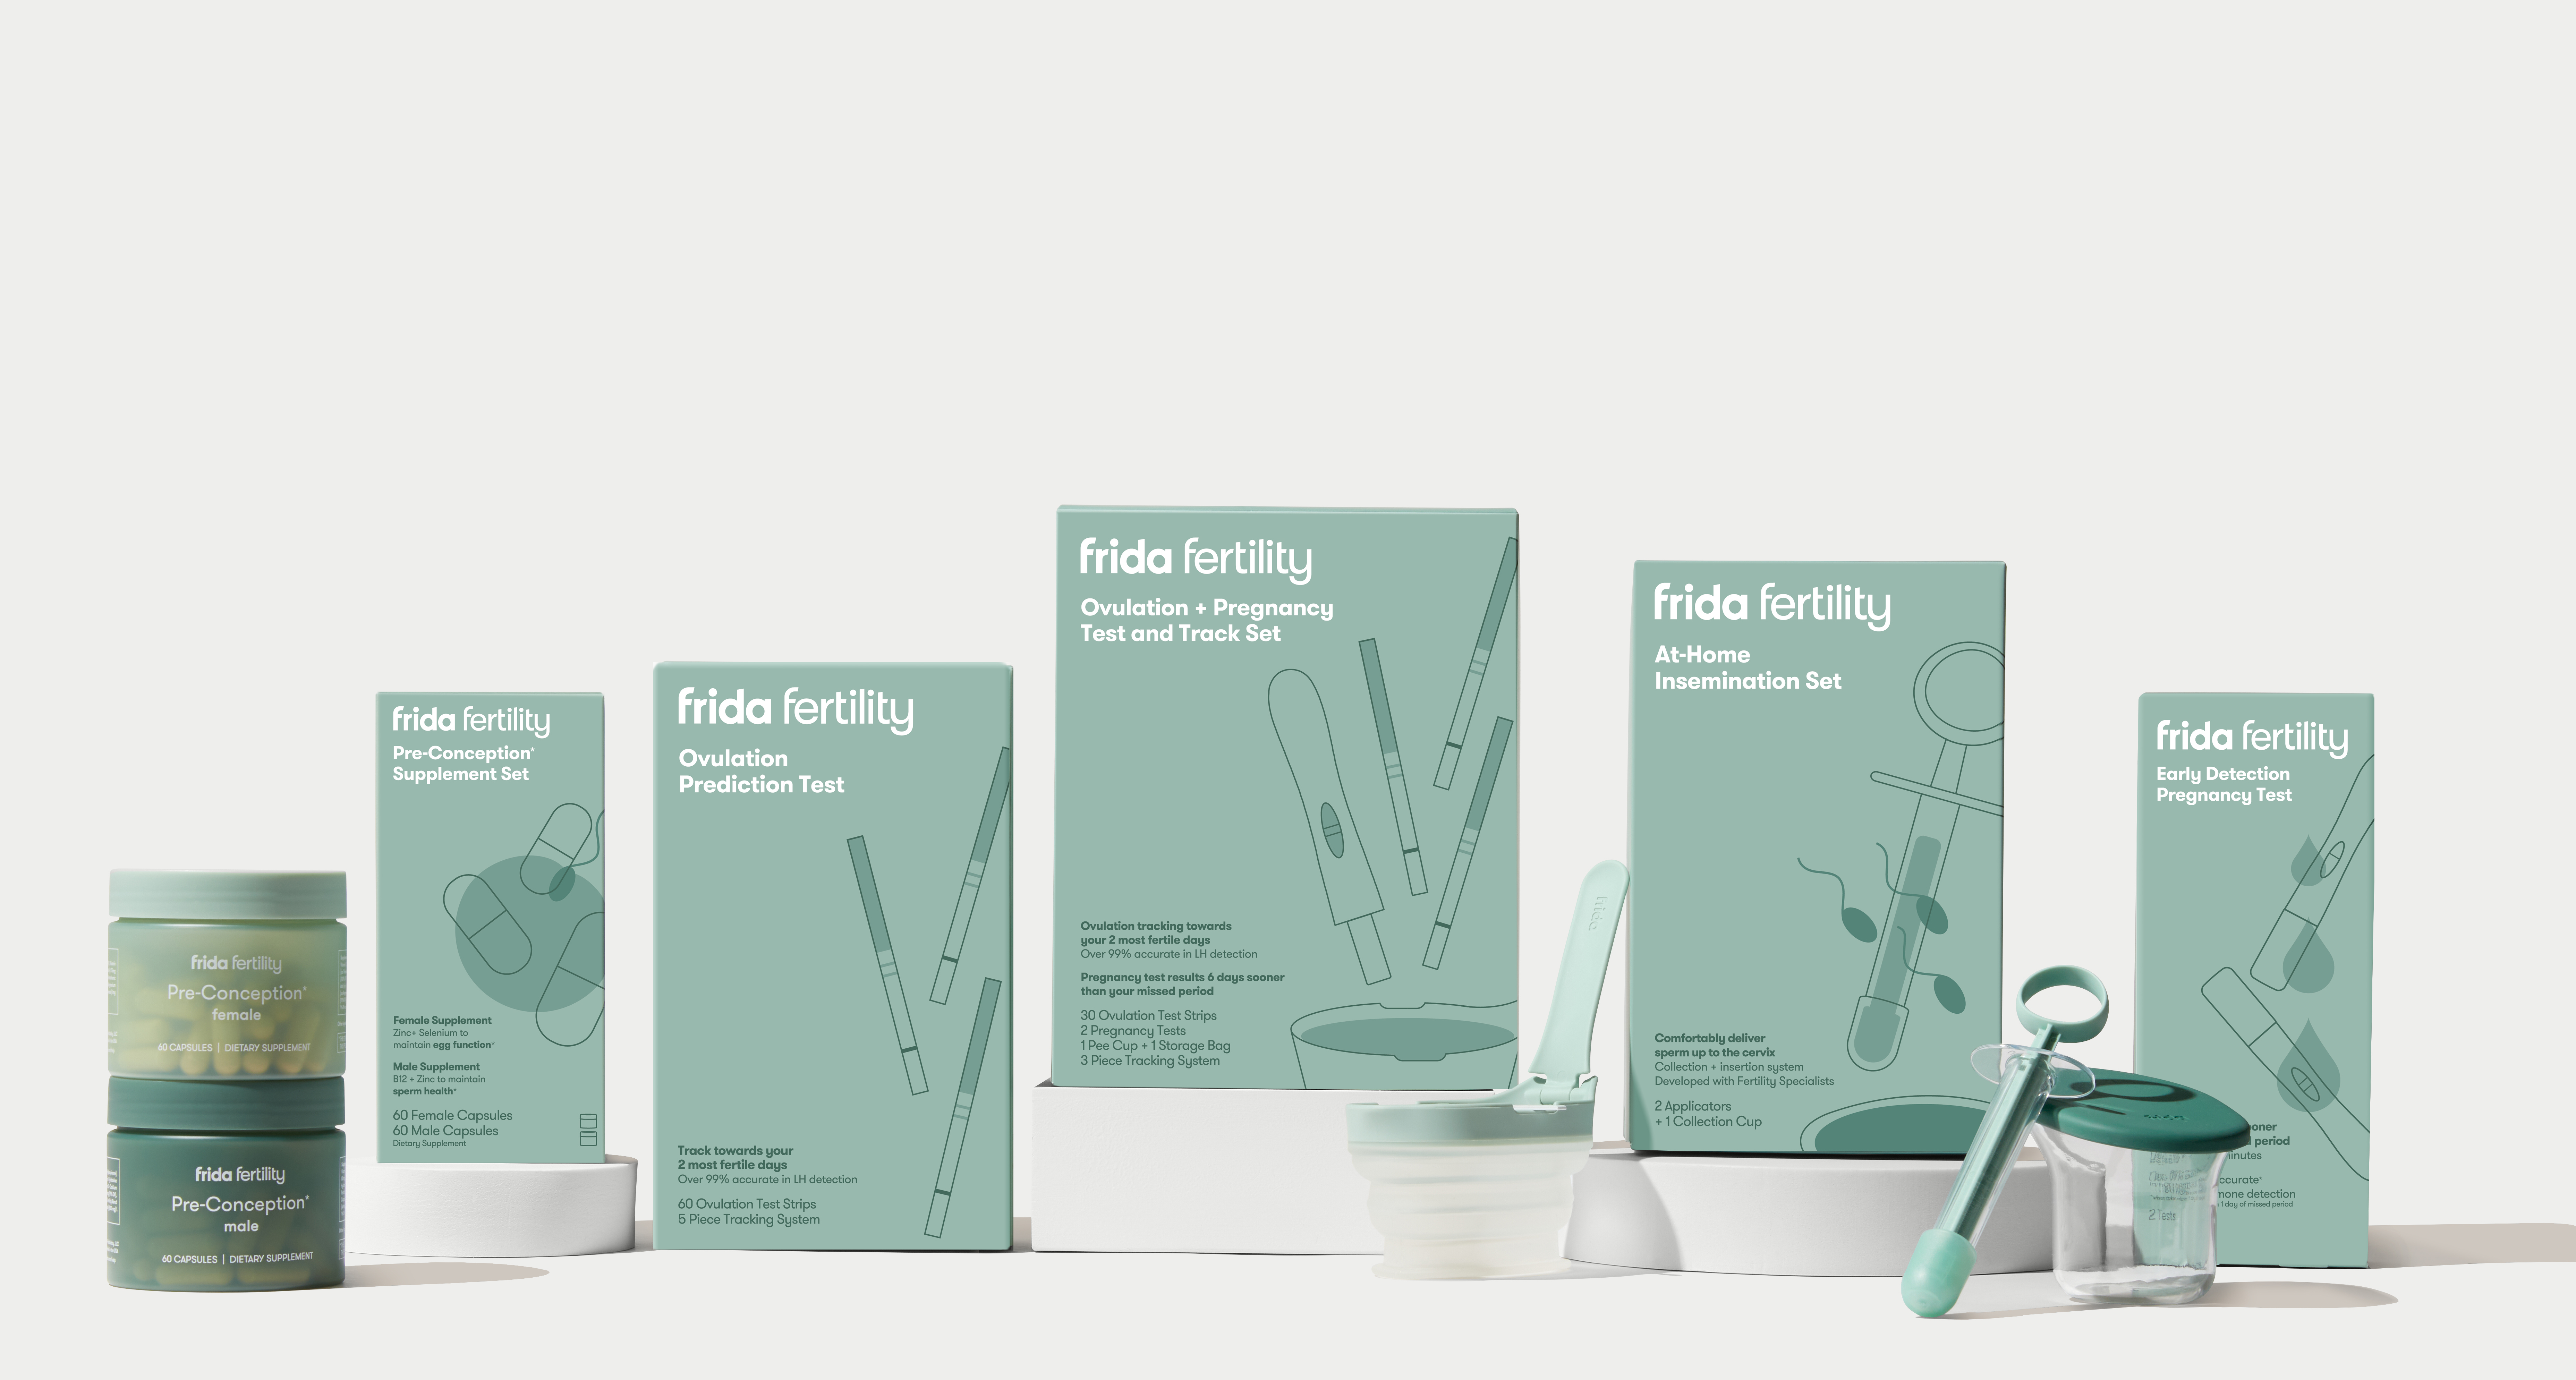 Introducing Frida Fertility, a New Line of Simple Solutions for the Not-so-Simple Act of Babymaking Business Wire pic pic